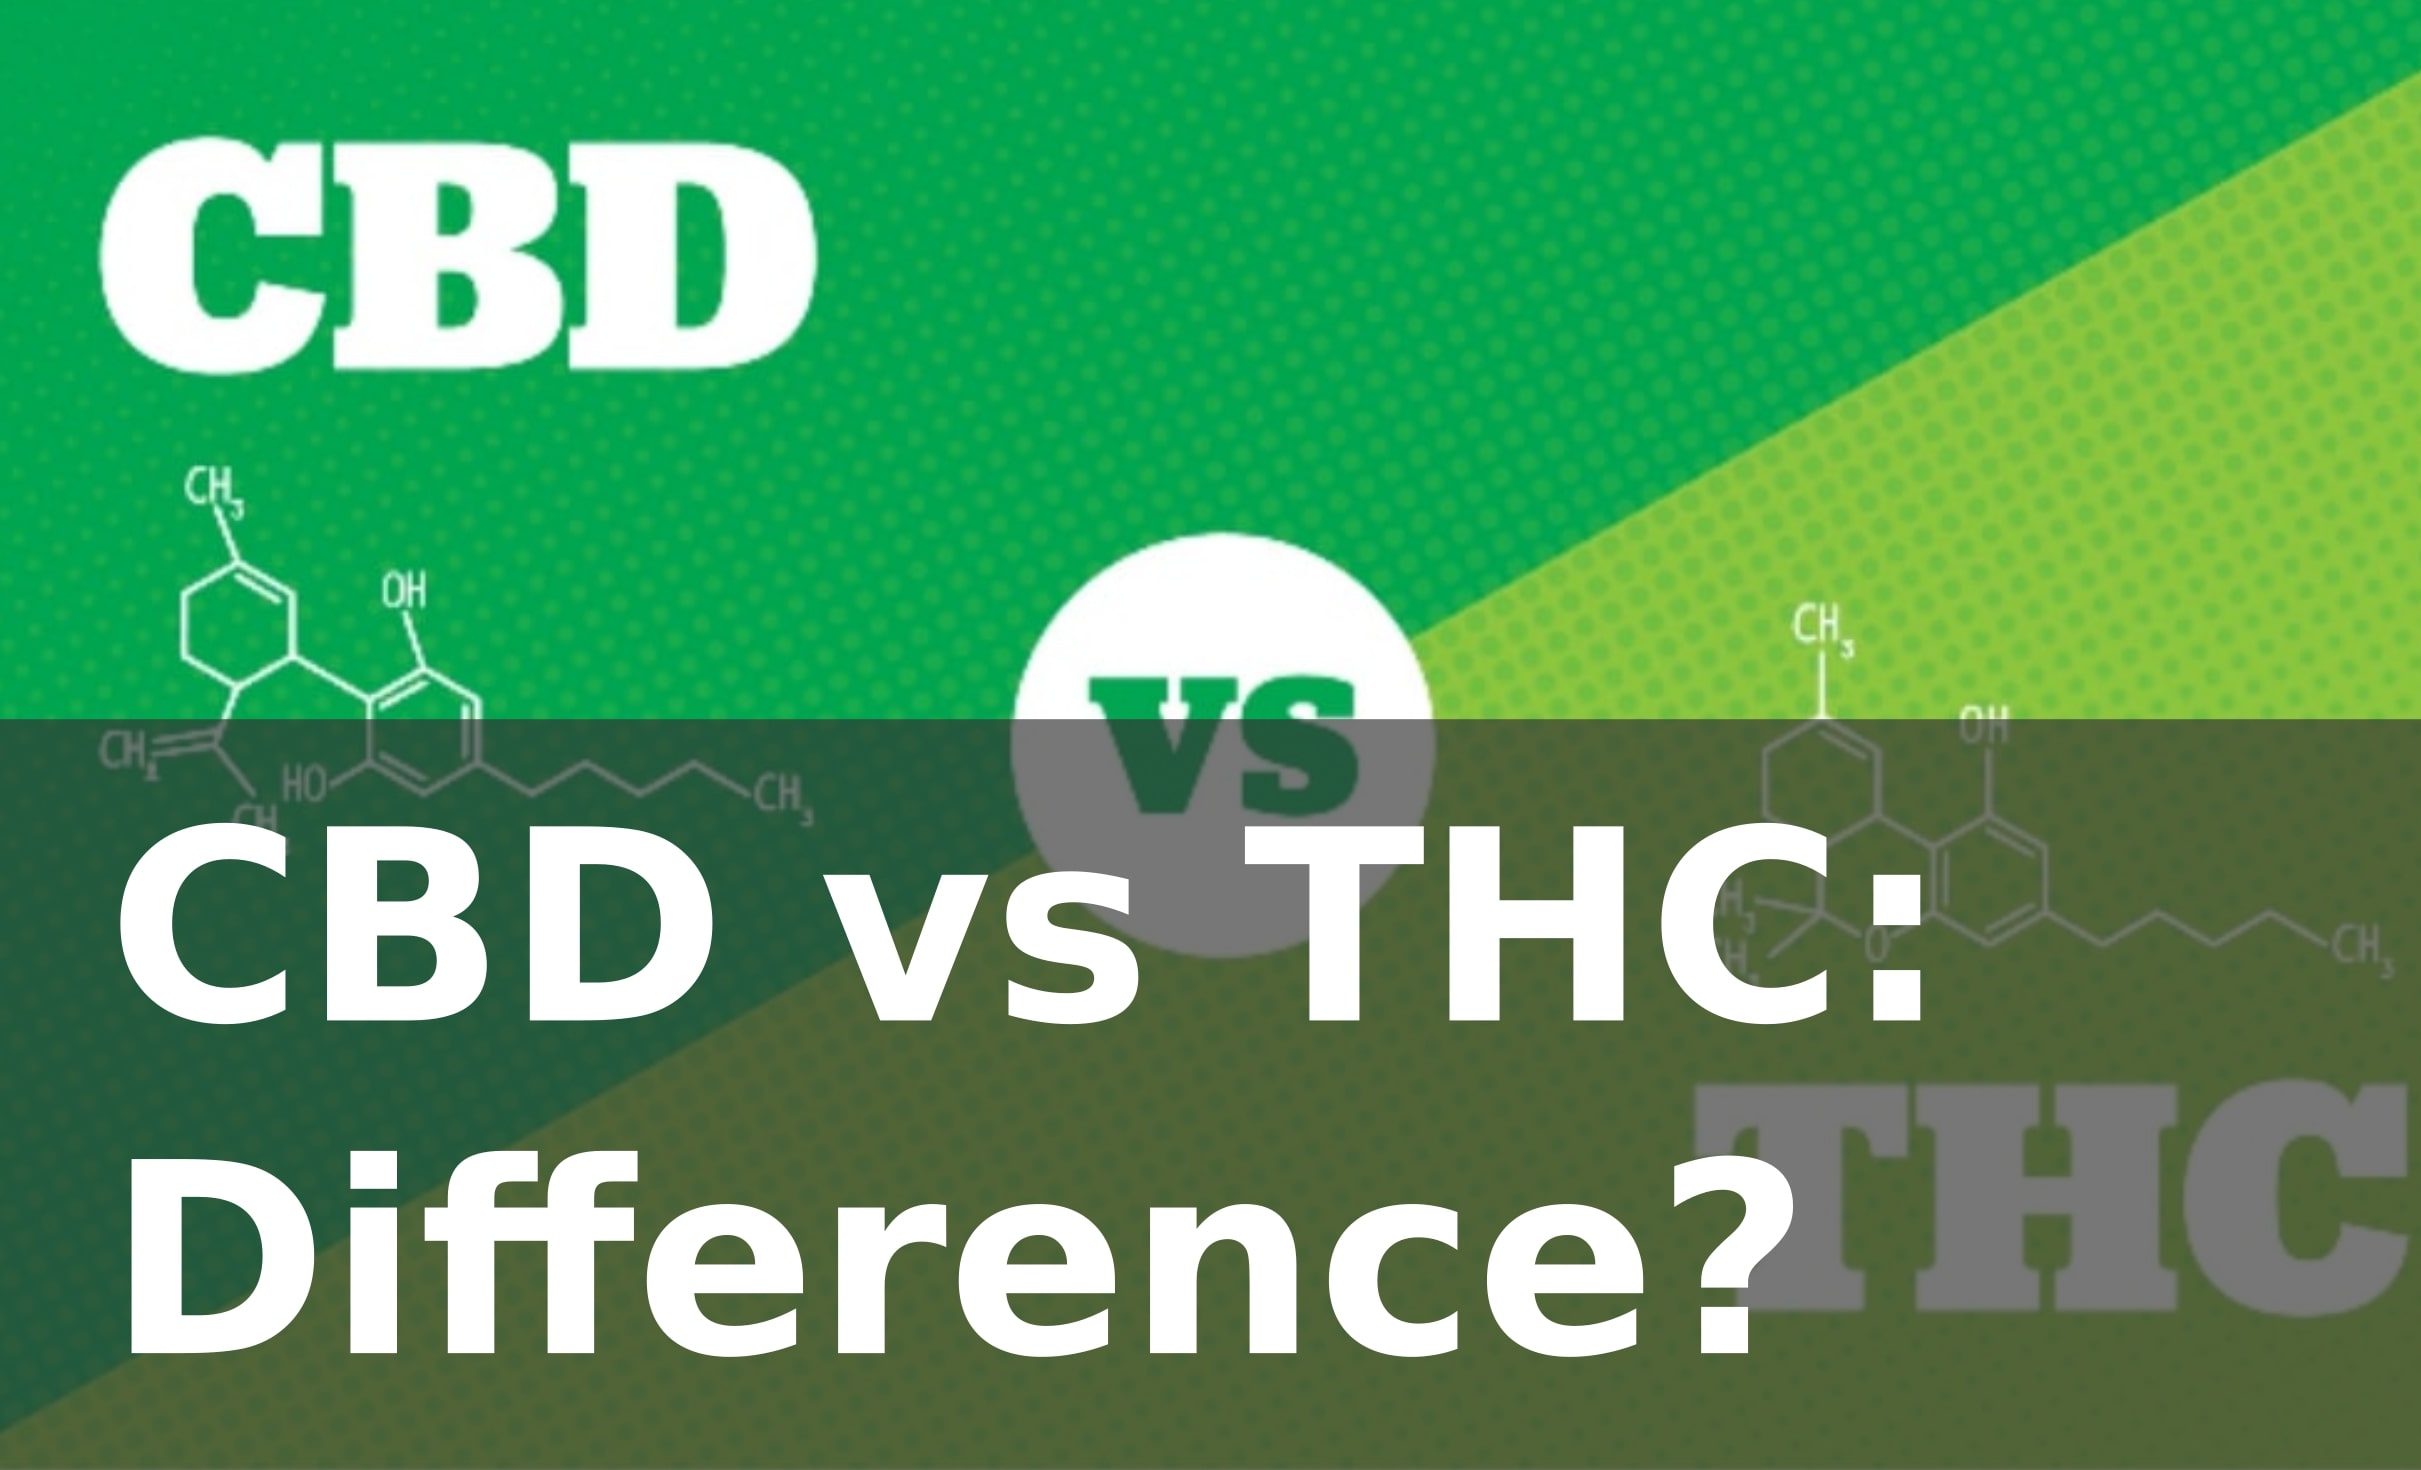 CBD vs. THC - What are the Differences?